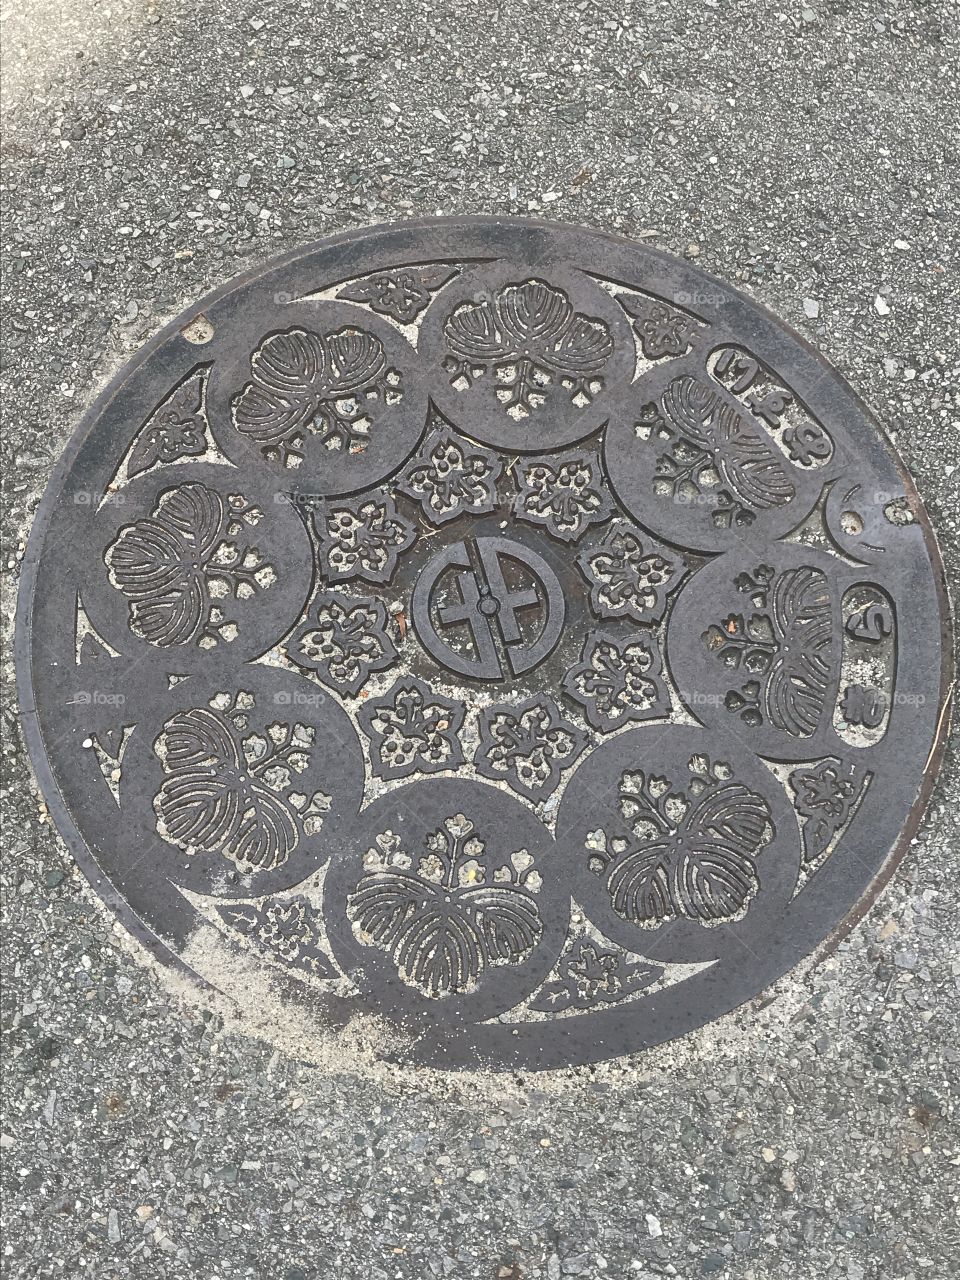 I am on a quest to find Japan's artistic manhole covers.